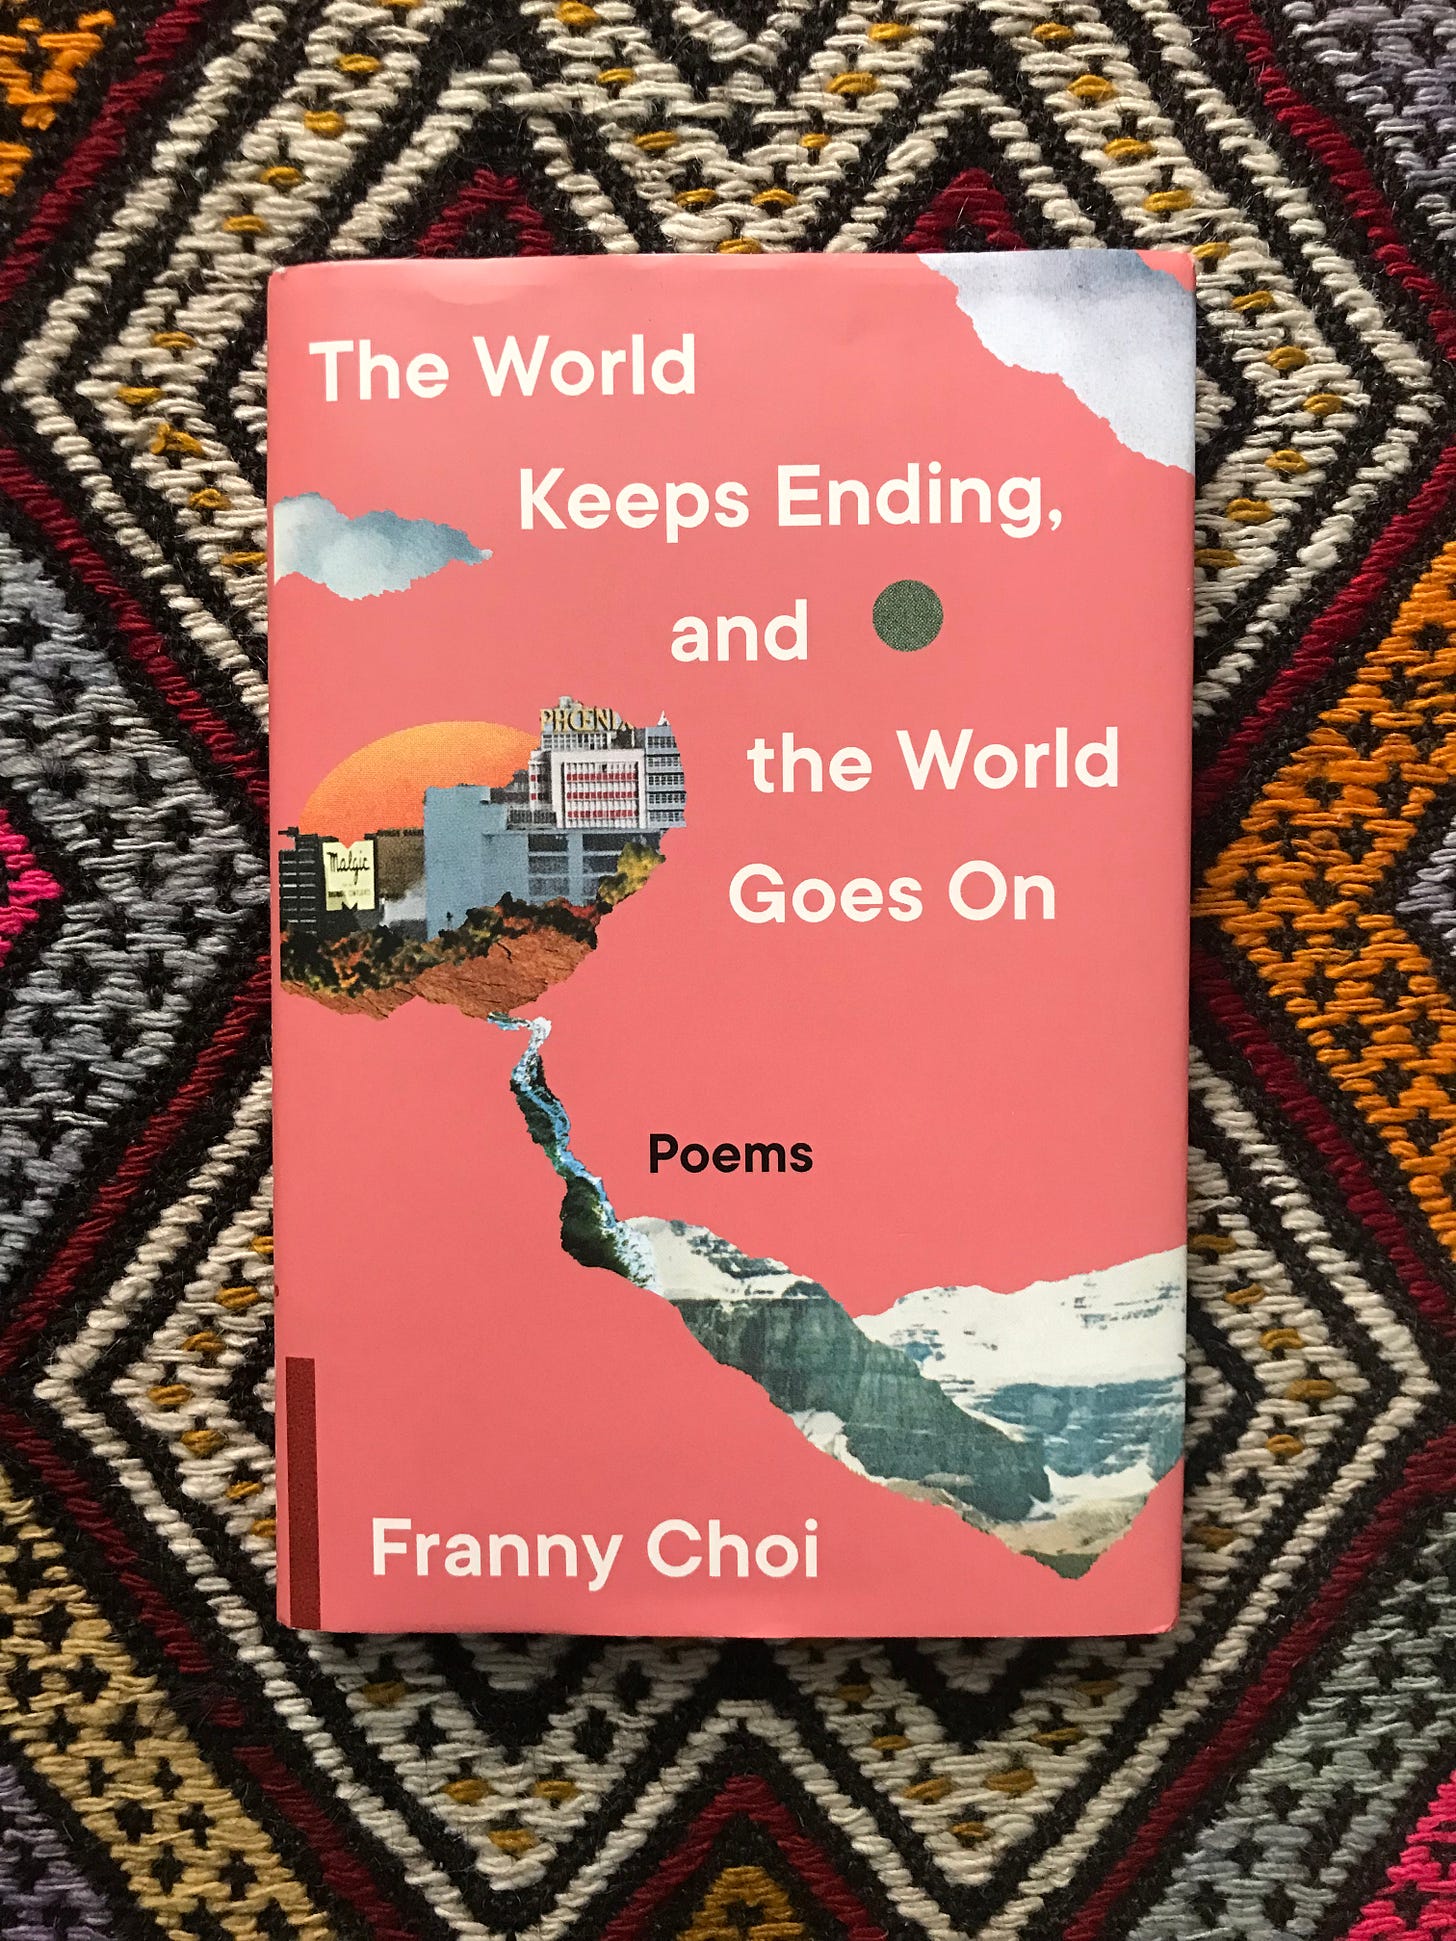 Picture of a book sitting on a rug. The book is called "The World Keeps Ending, and the World Goes On: Poems" and the cover is mostly pink, with an image of buildings on a mountain with the sun and a cloud behind them.